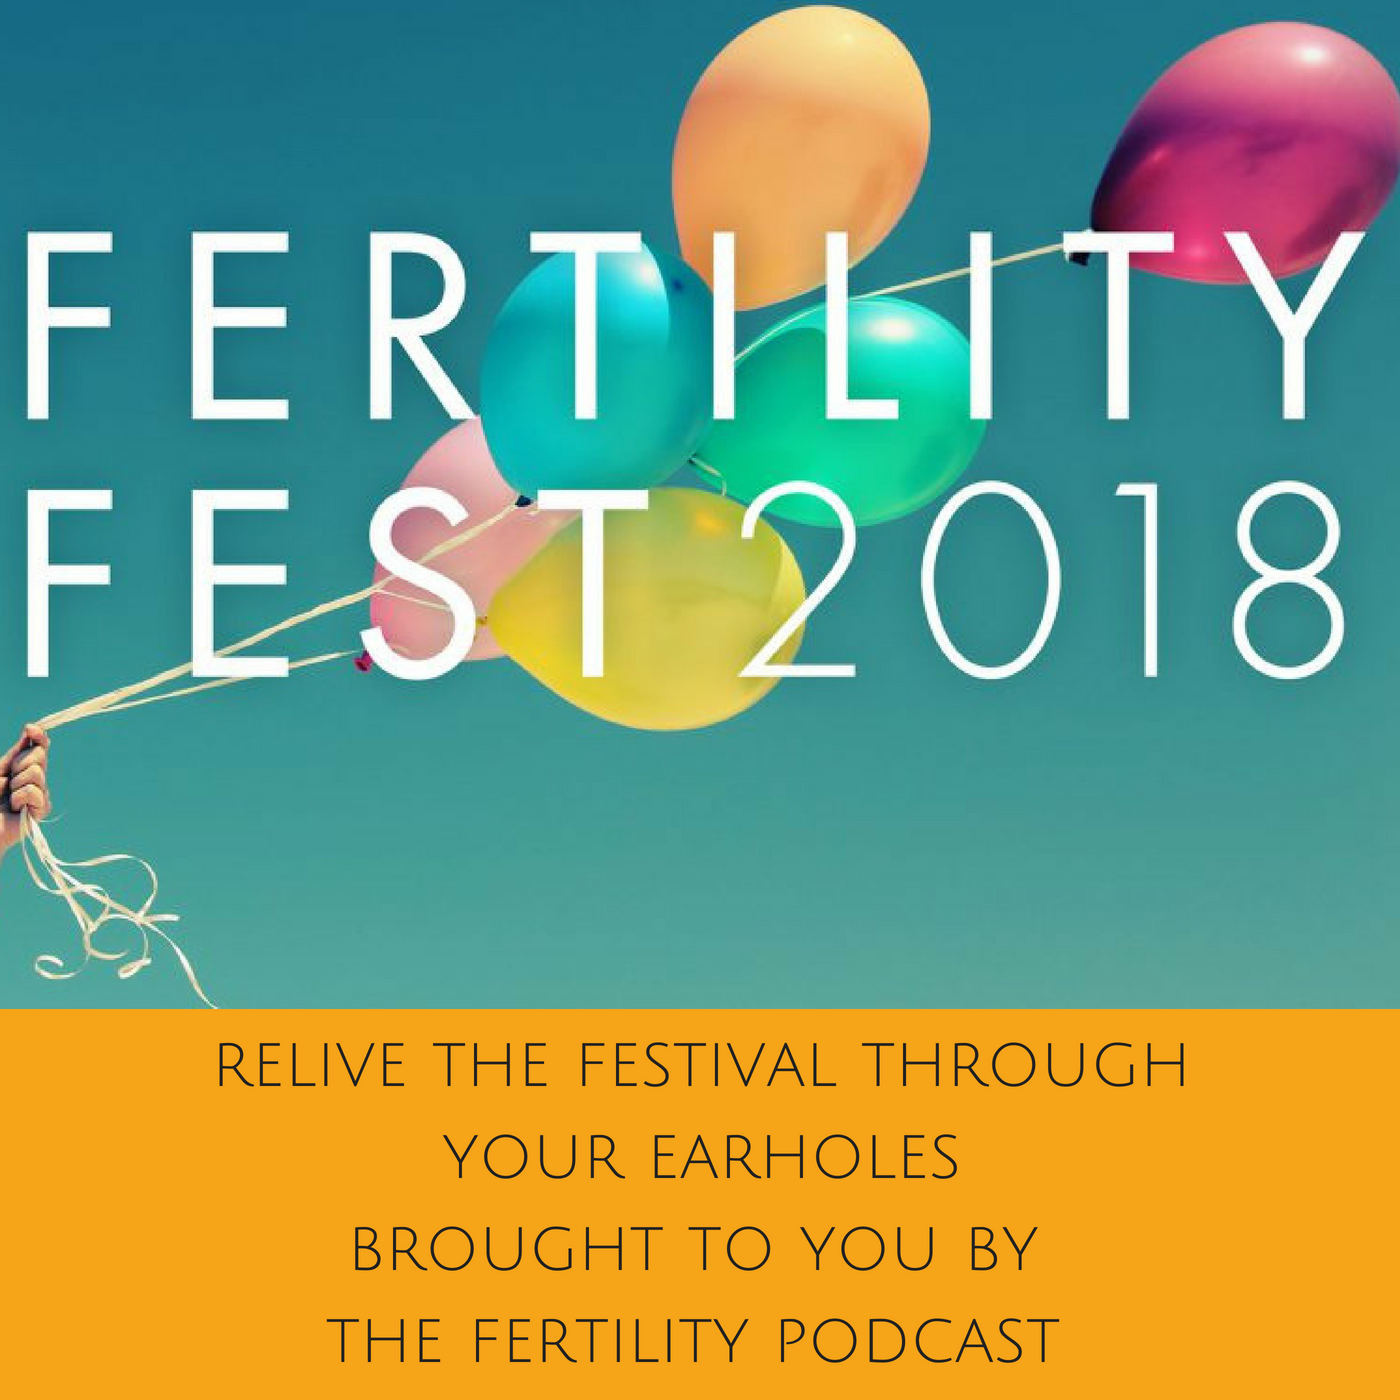 BONUS EPISODE FERTILITY FEST 2018: How to make something beautiful out of a mess